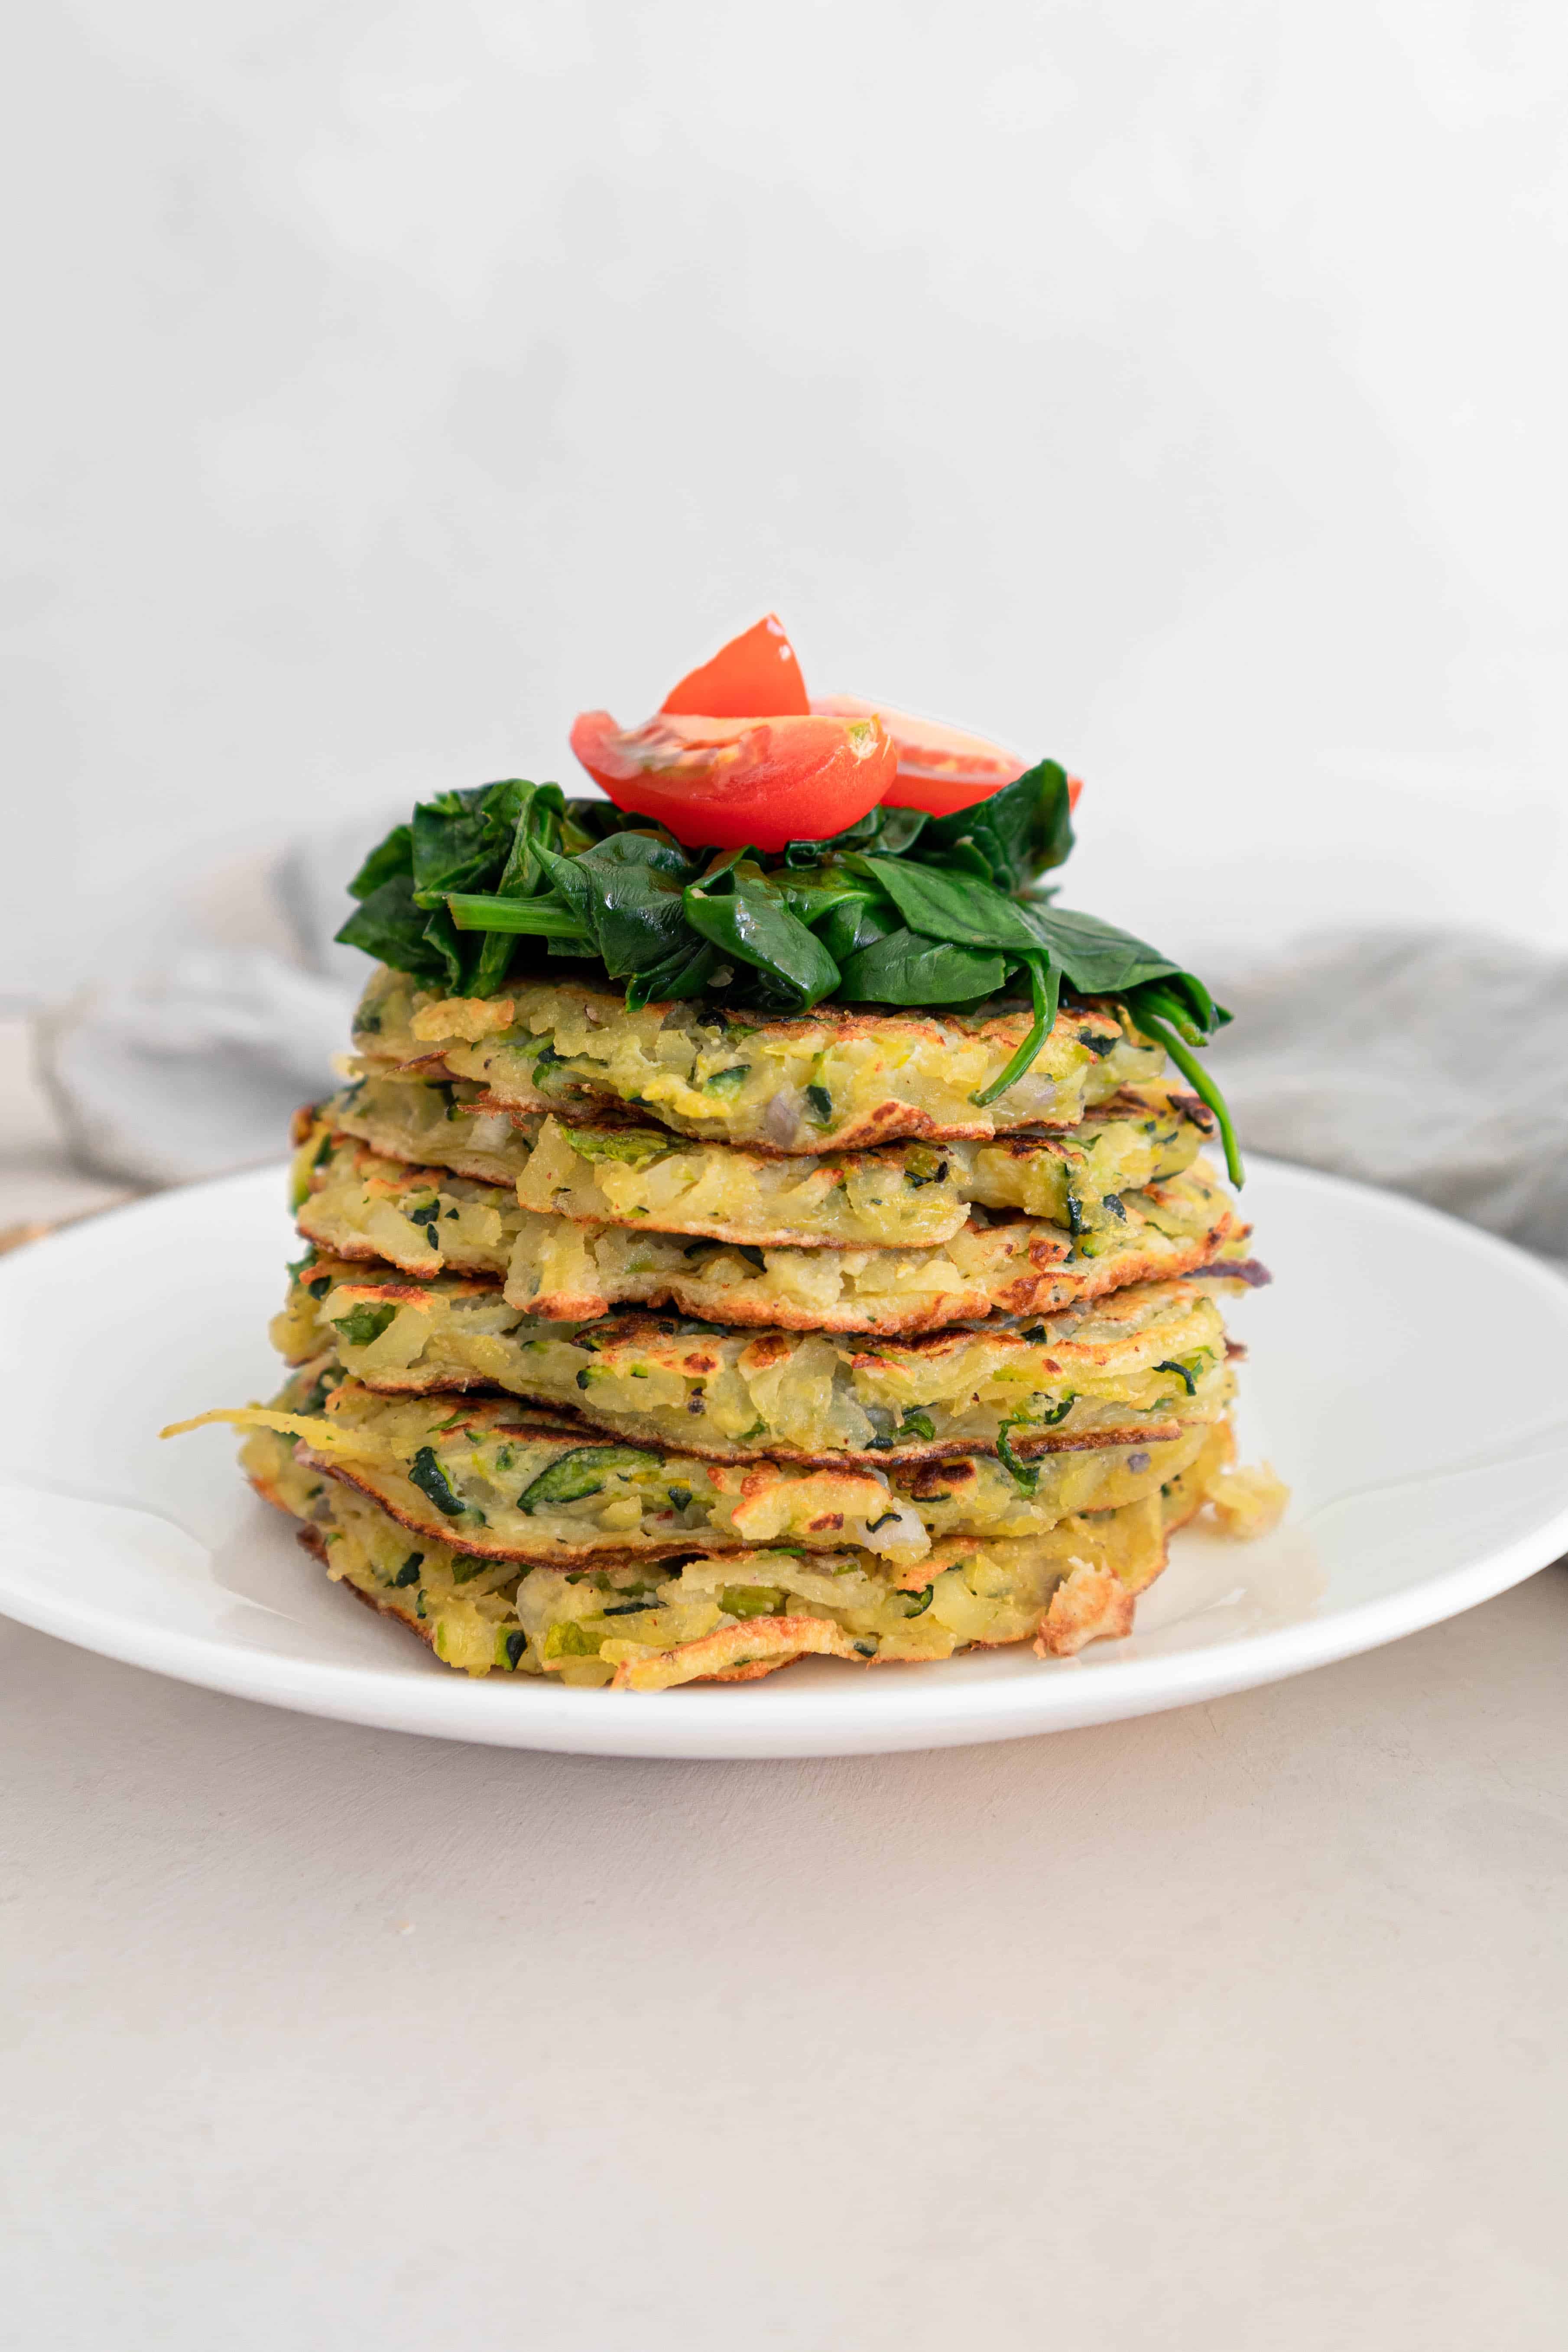 Stack of zucchini and potato fritters (Gluten-free) with wilted spinach and tomato